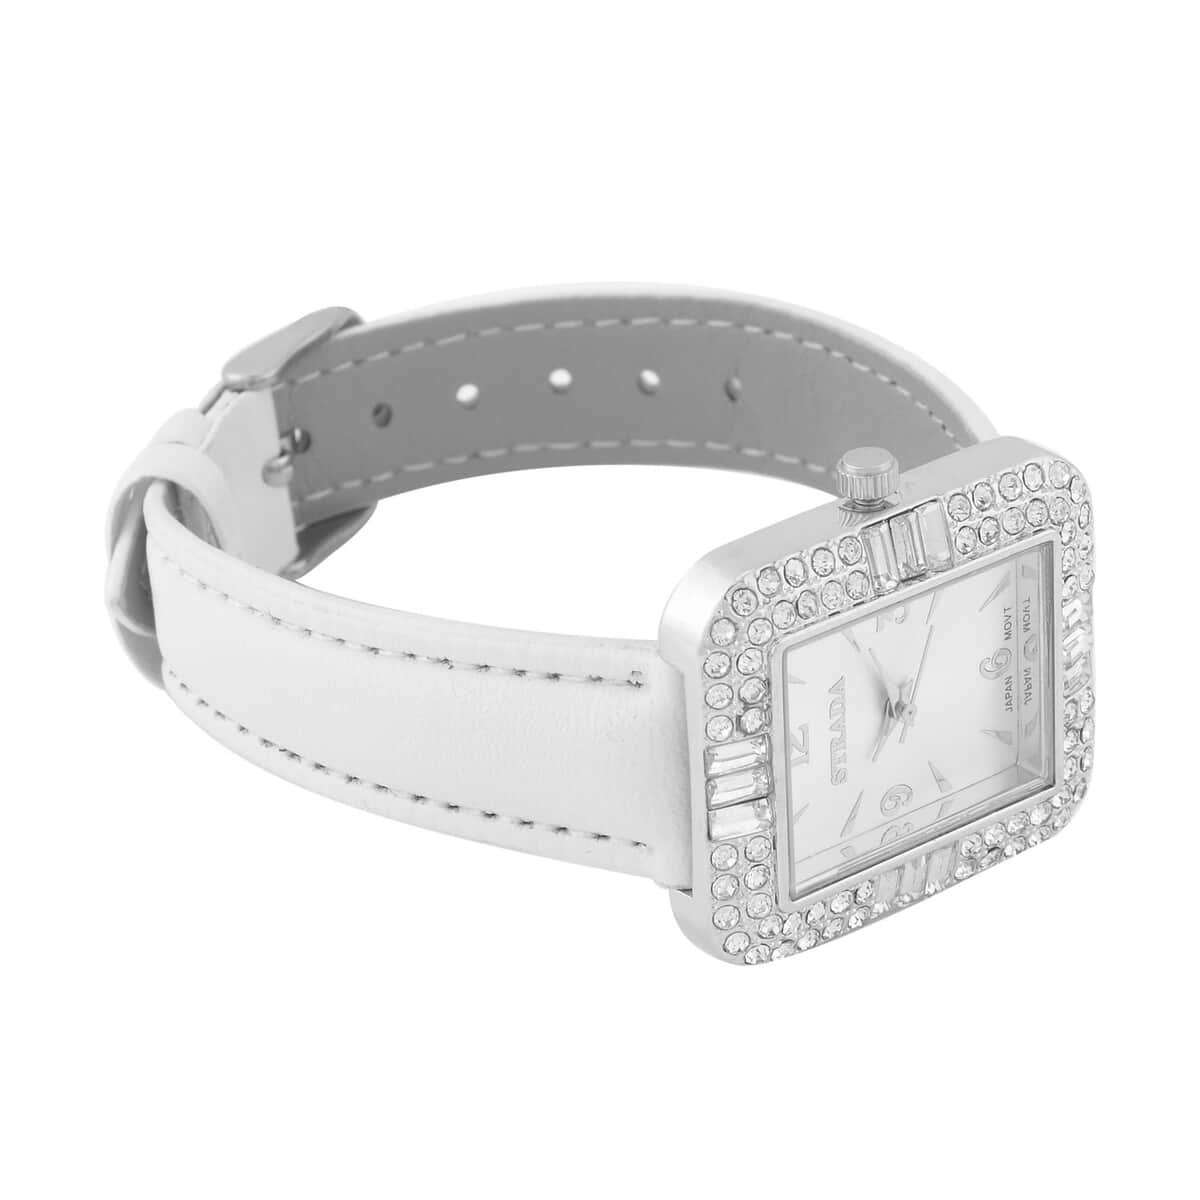 Strada White Austrian Crystal Japanese Movement Watch with White Faux Leather Strap (34mm) (6.5-8In) image number 4